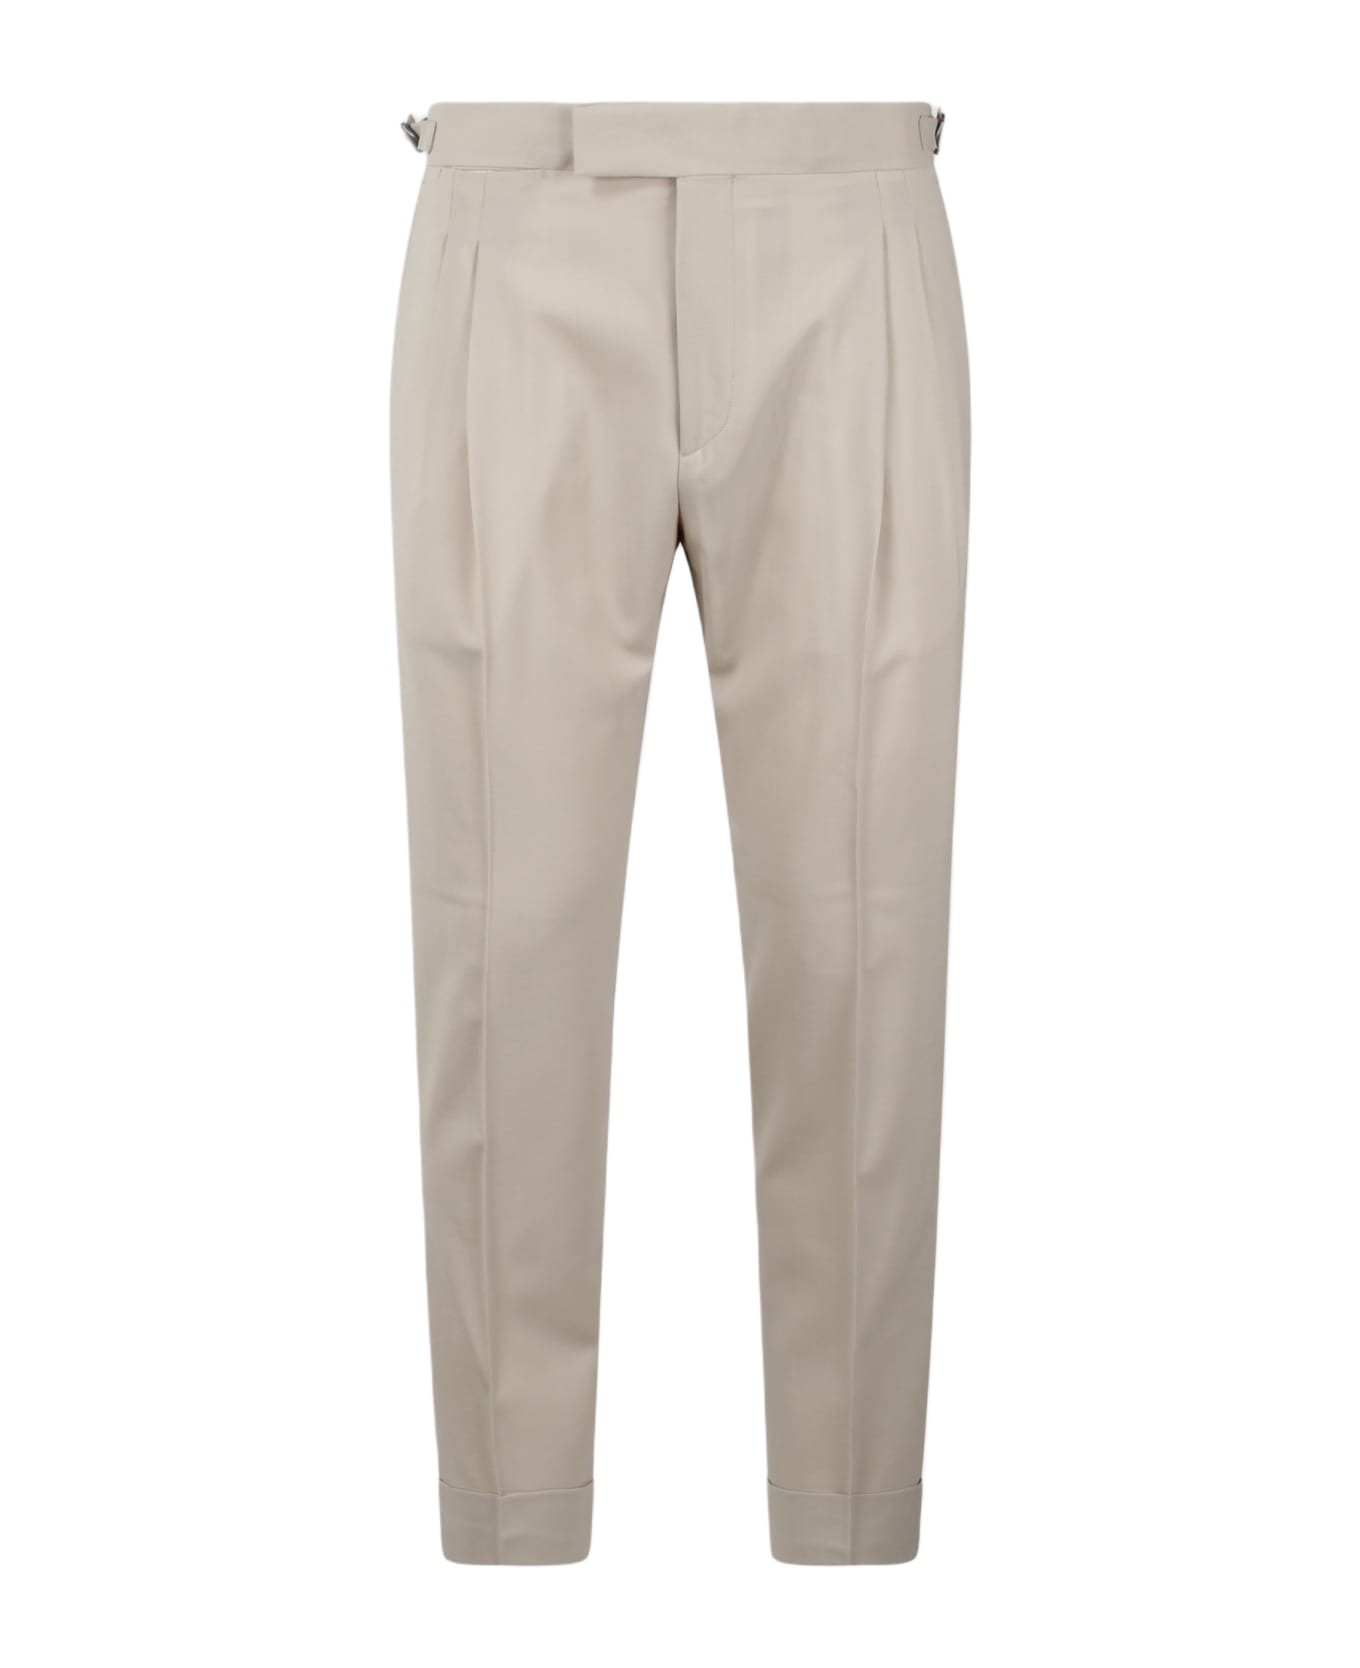 Be Able Robby Pleated Pants - Nude & Neutrals